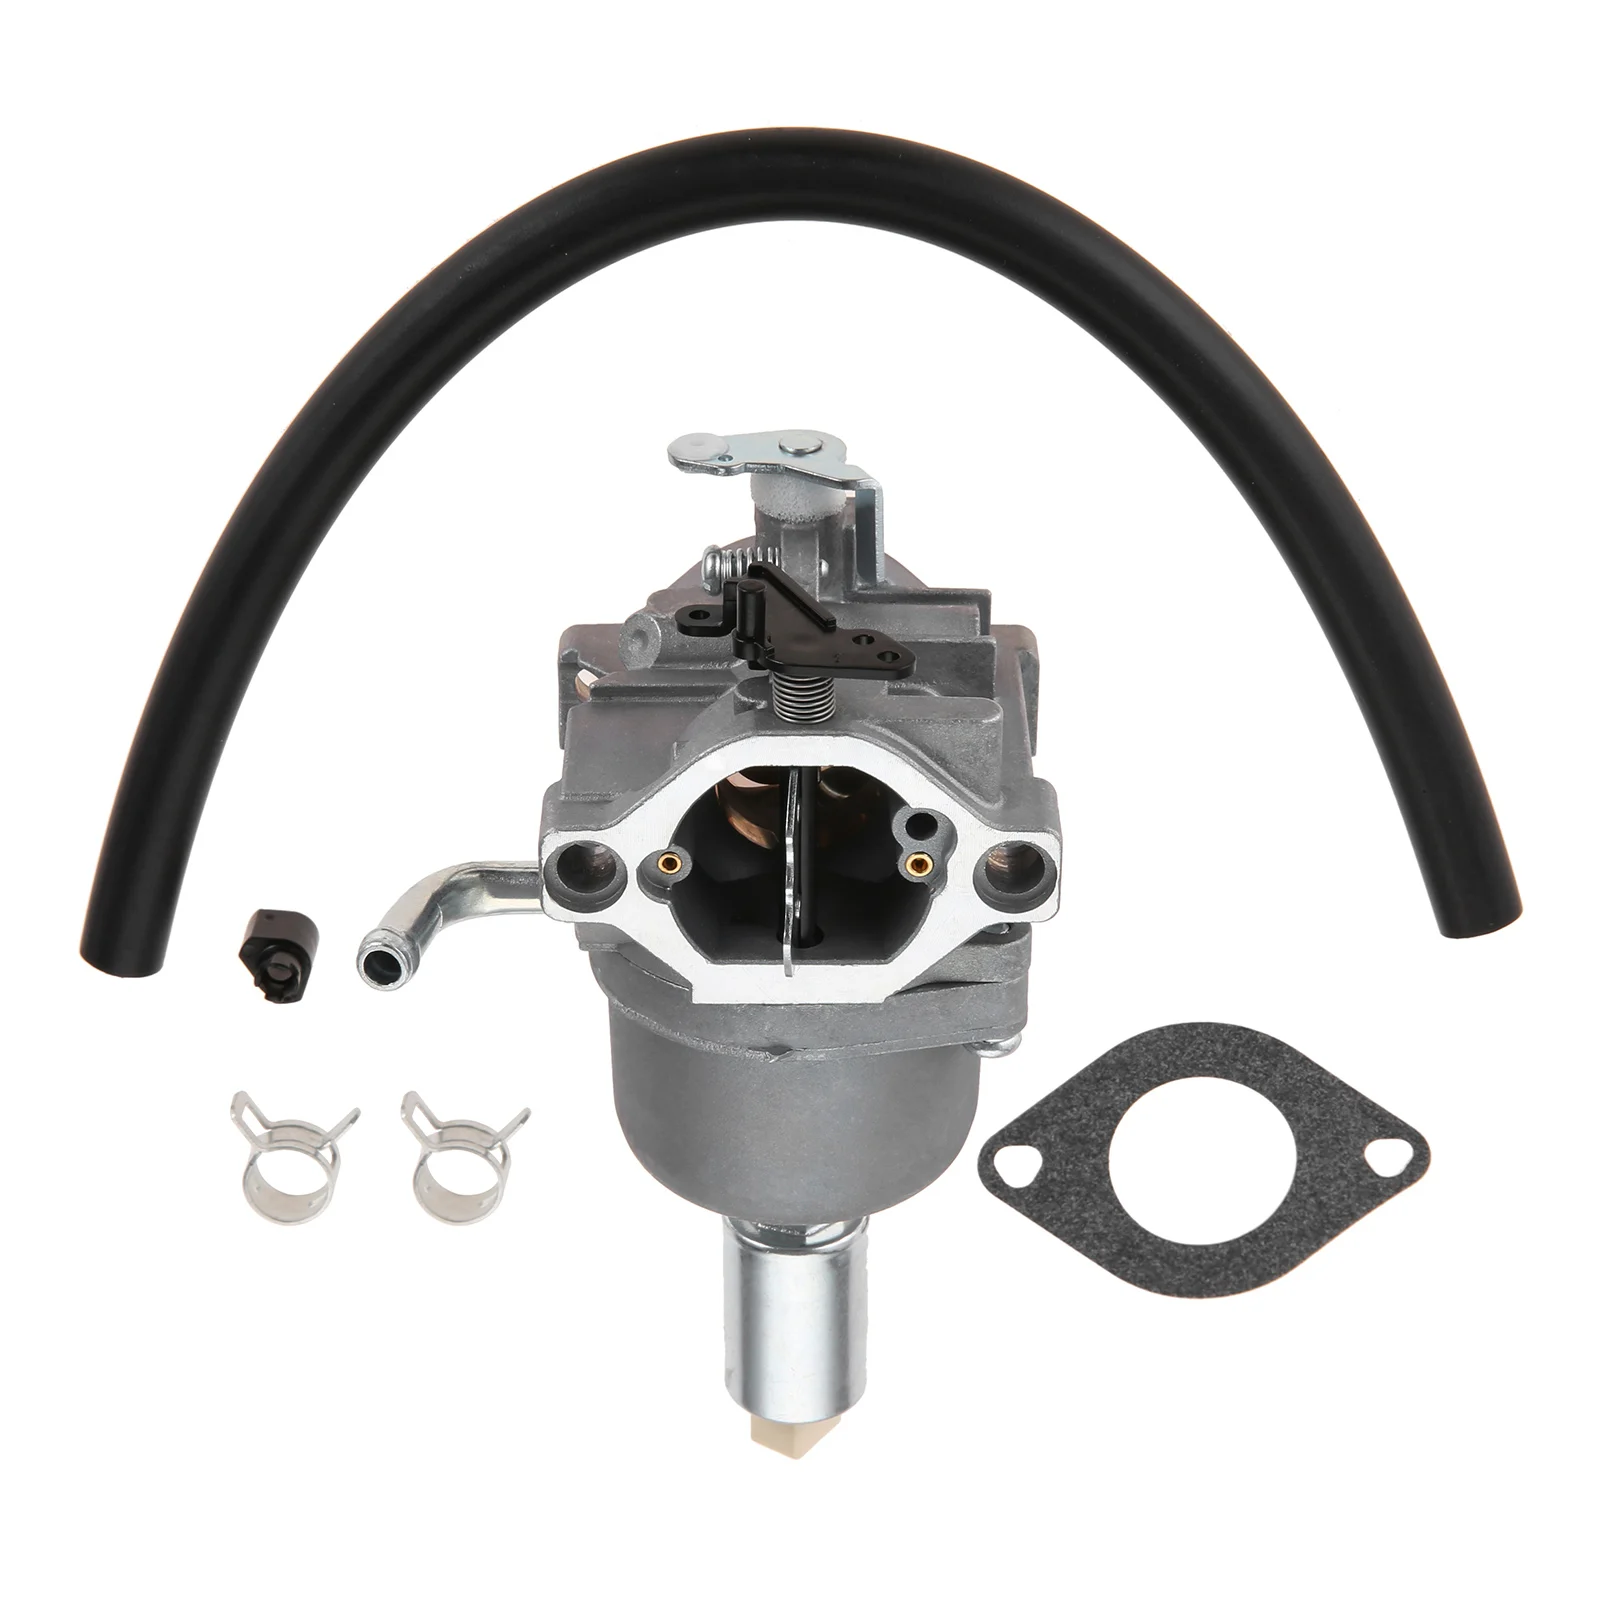 

Carburetor kit Replacement for Briggs Stratton 796109 591731 594593 14.5hp-21hp Carb 591734 Replace # 796110 844717 Tool Parts